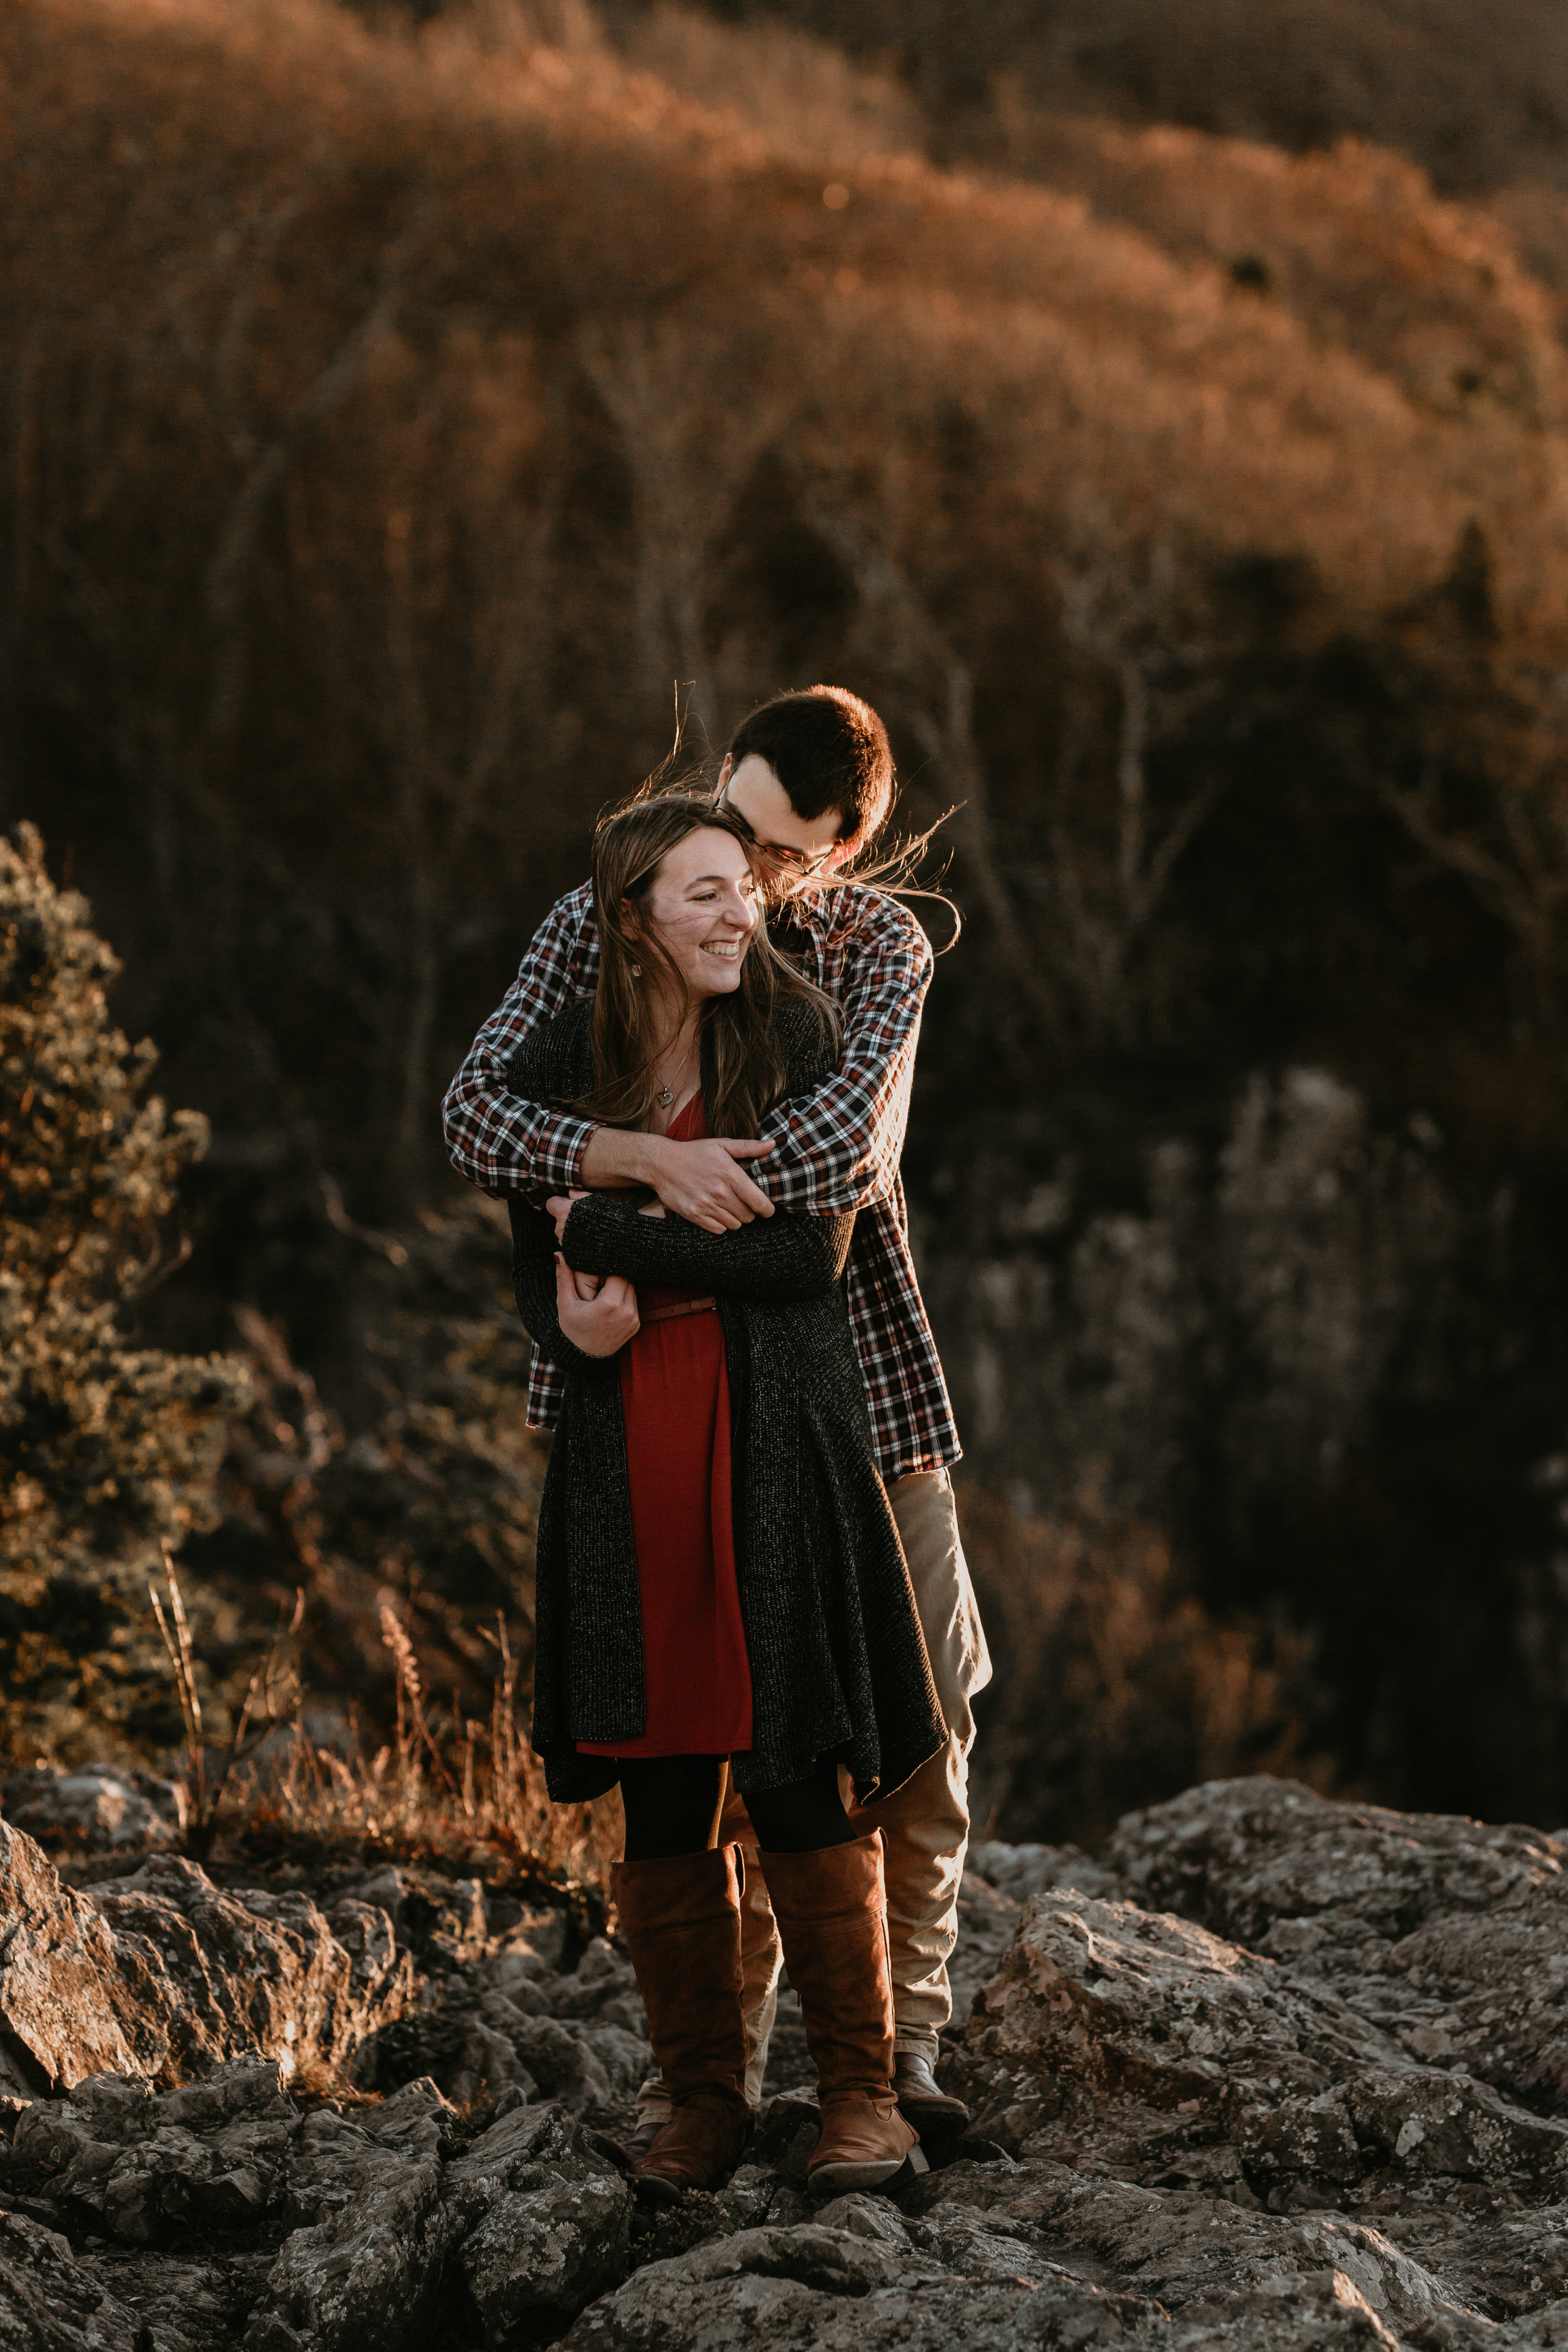 nicole-daacke-photography-shenandoah-national-park-adventure-engagement-session-with-fall-foliage-shenandoah-elopement-photographer-engagement-photos-in-virginia-charlottesville-national-park-adventure-elopement-photographer-3937.jpg